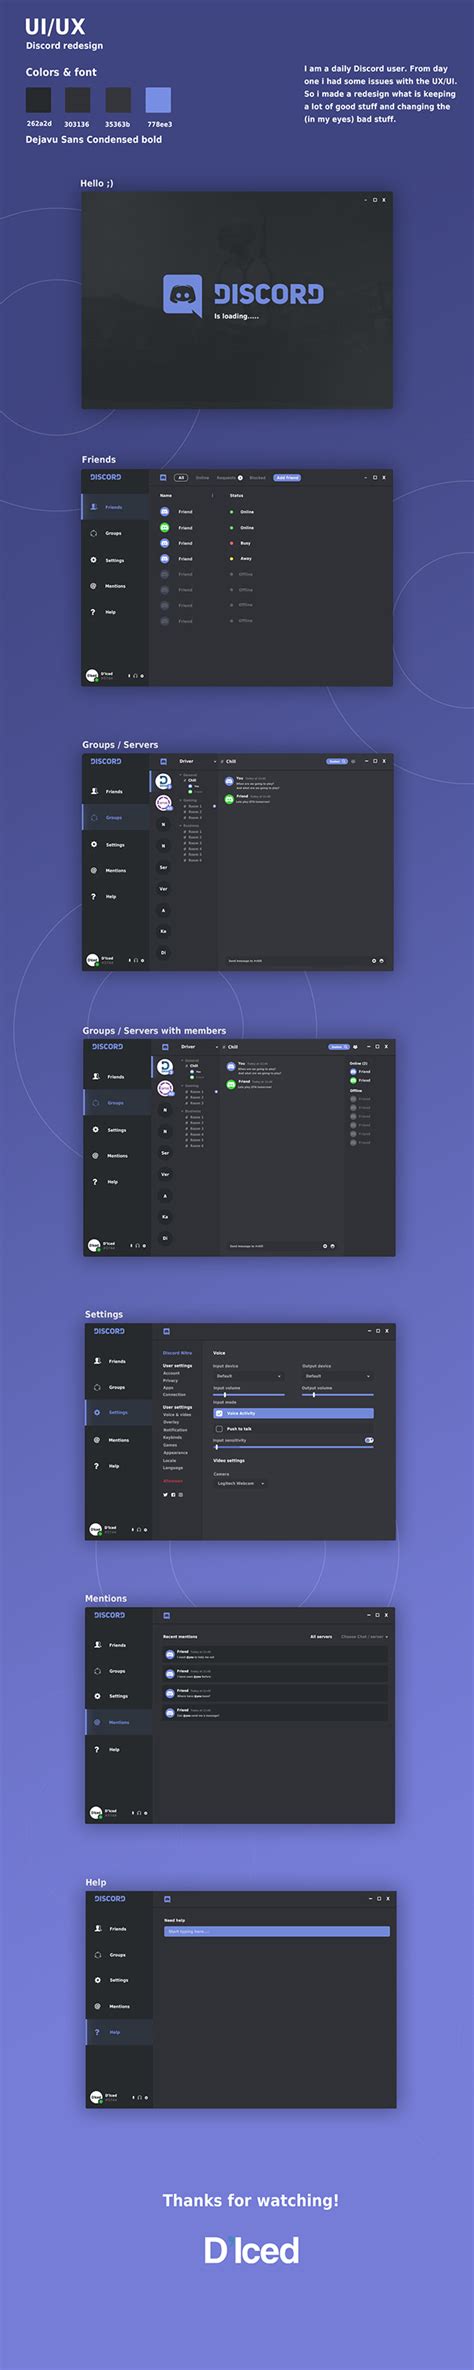 Discord Redesign On Behance